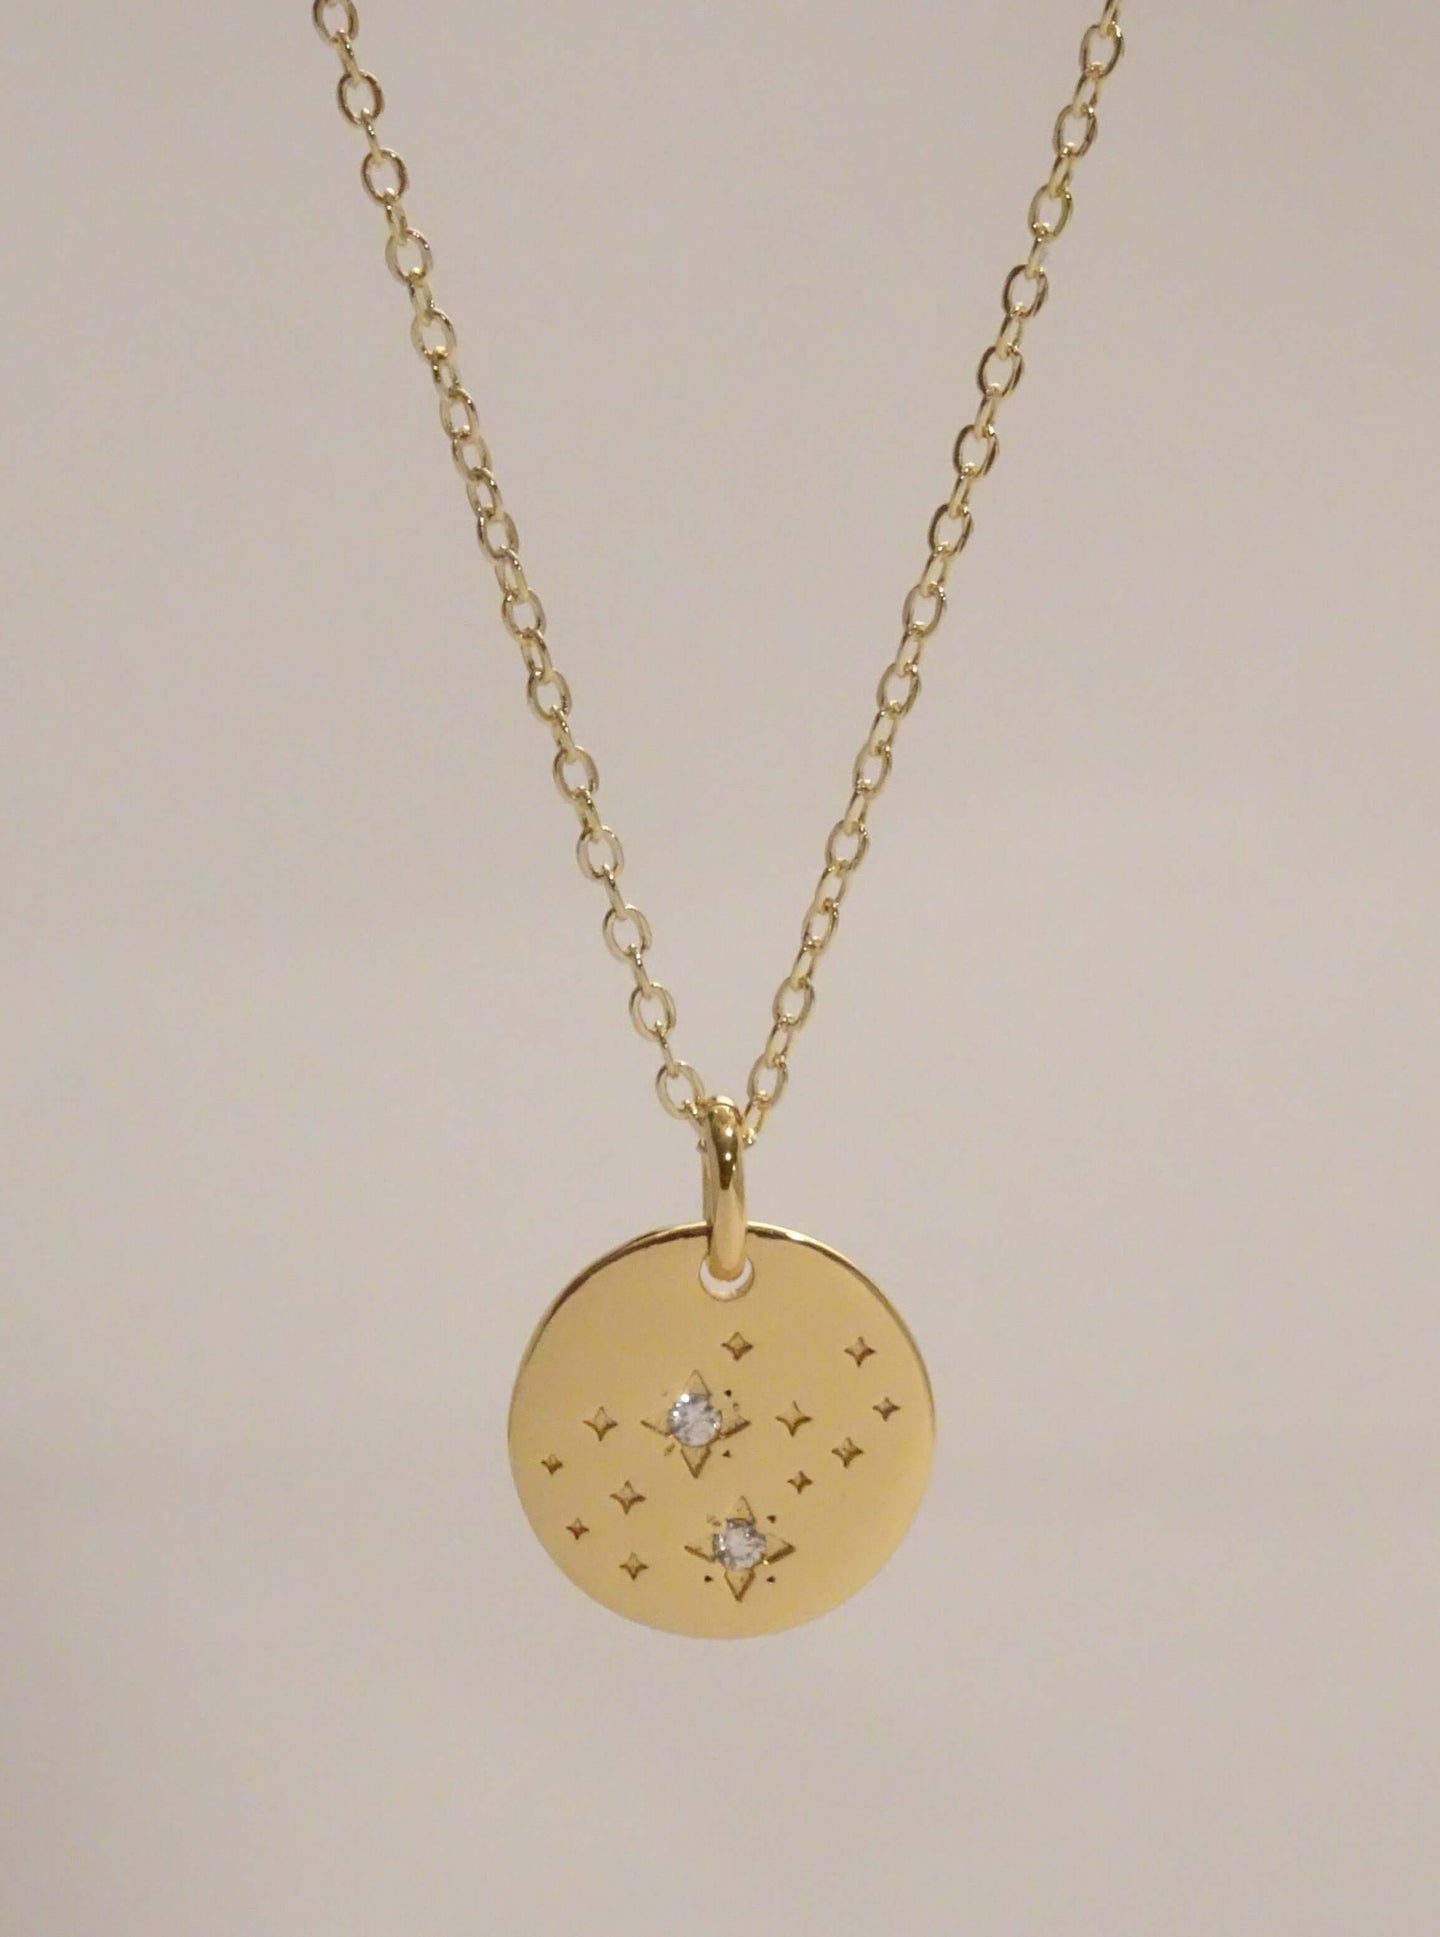 Virgo necklace, Virgo necklace silver, Virgo necklace constellations, Virgo necklace aesthetic, Virgo coin necklace, zodiac necklace, constellation necklace, star sign necklace gold, zodiac jewelry, zodiac pendant, layering necklaces gold